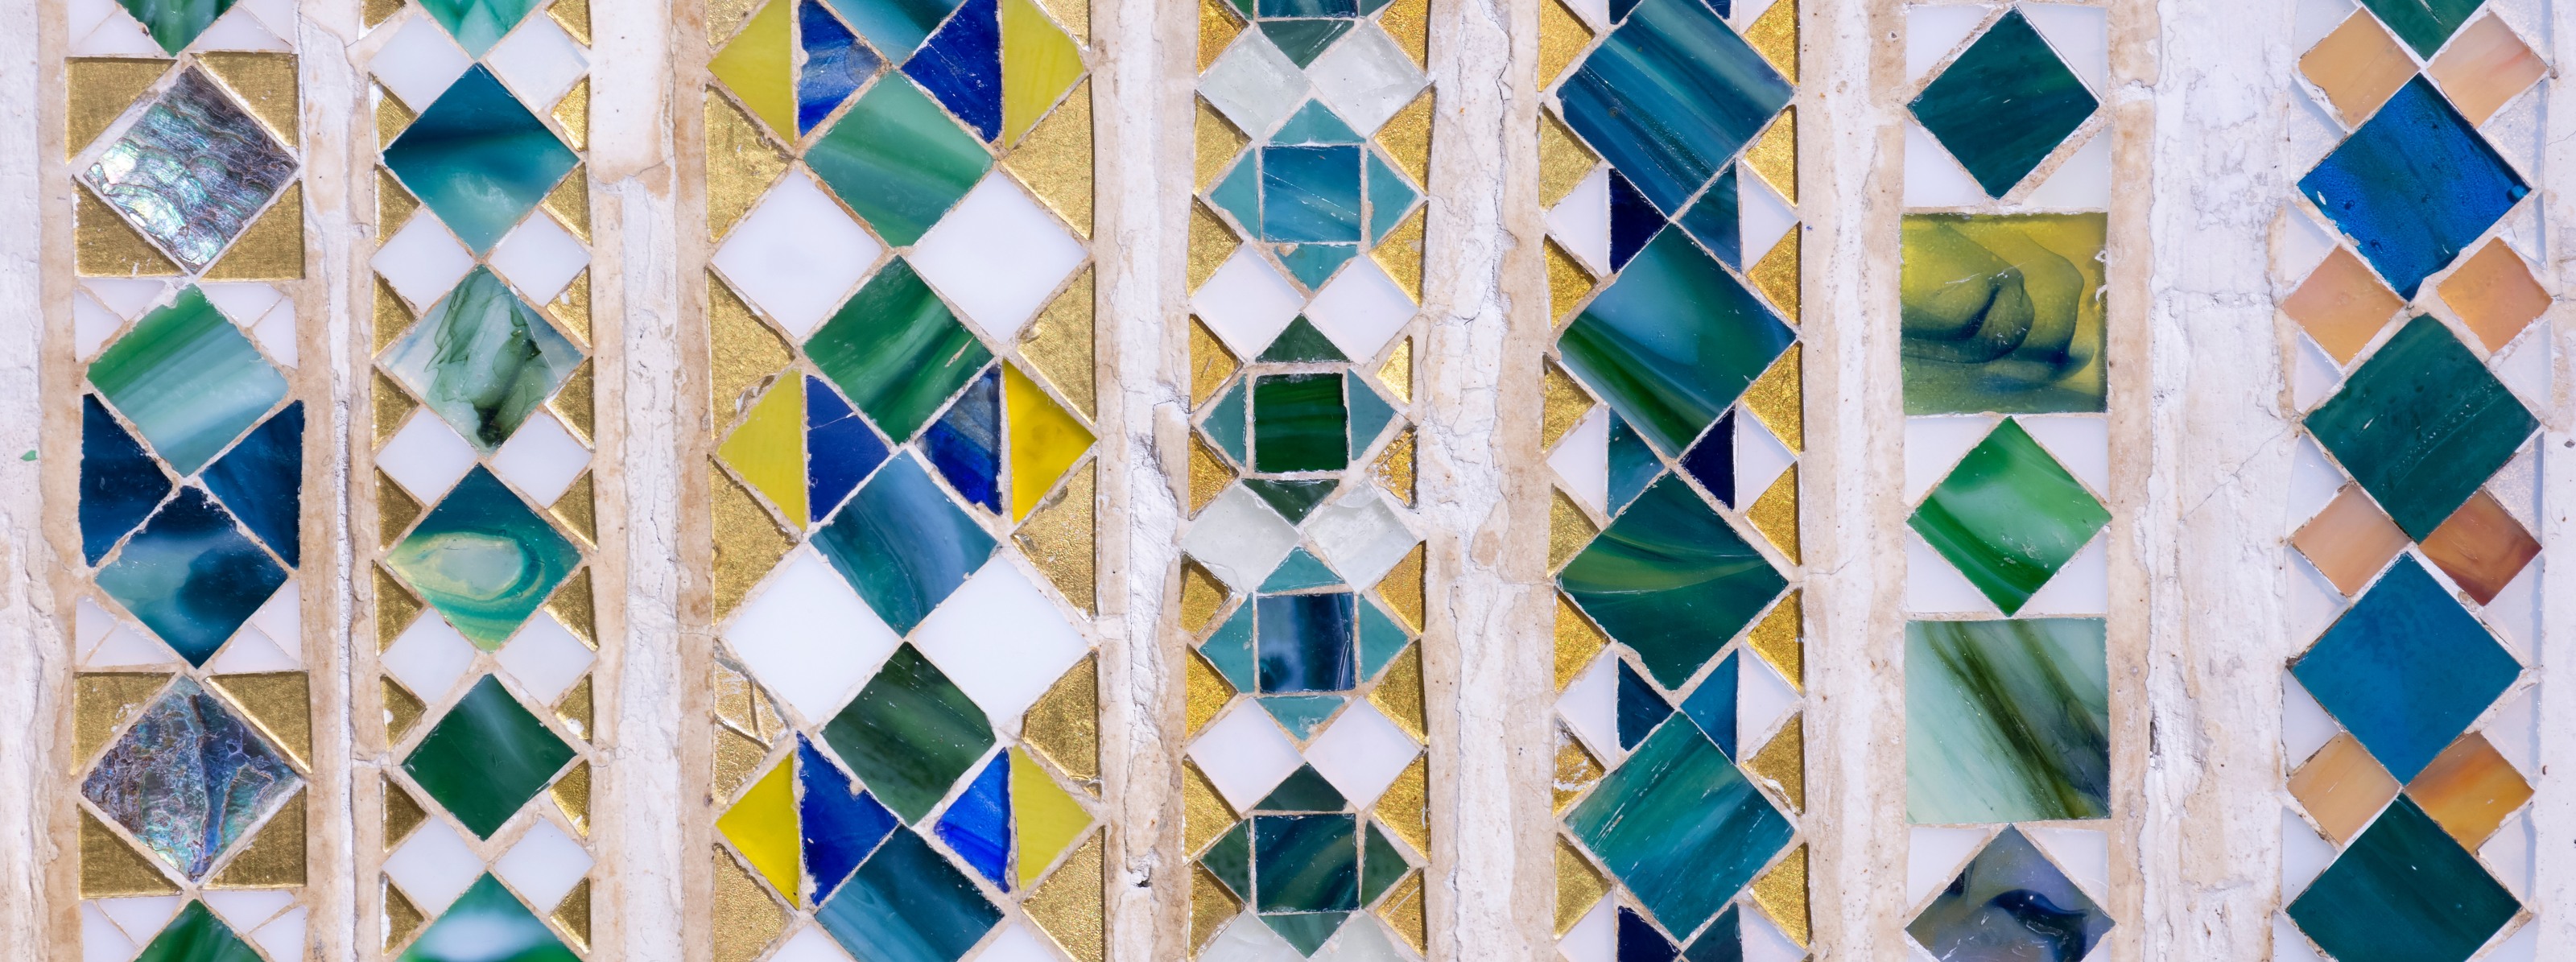 a section of decorative borders in geometric favrile glass tesserae, by tiffany studios, part of a larger panel on display in the tiffany mosaic showroom for clients to select for their designs